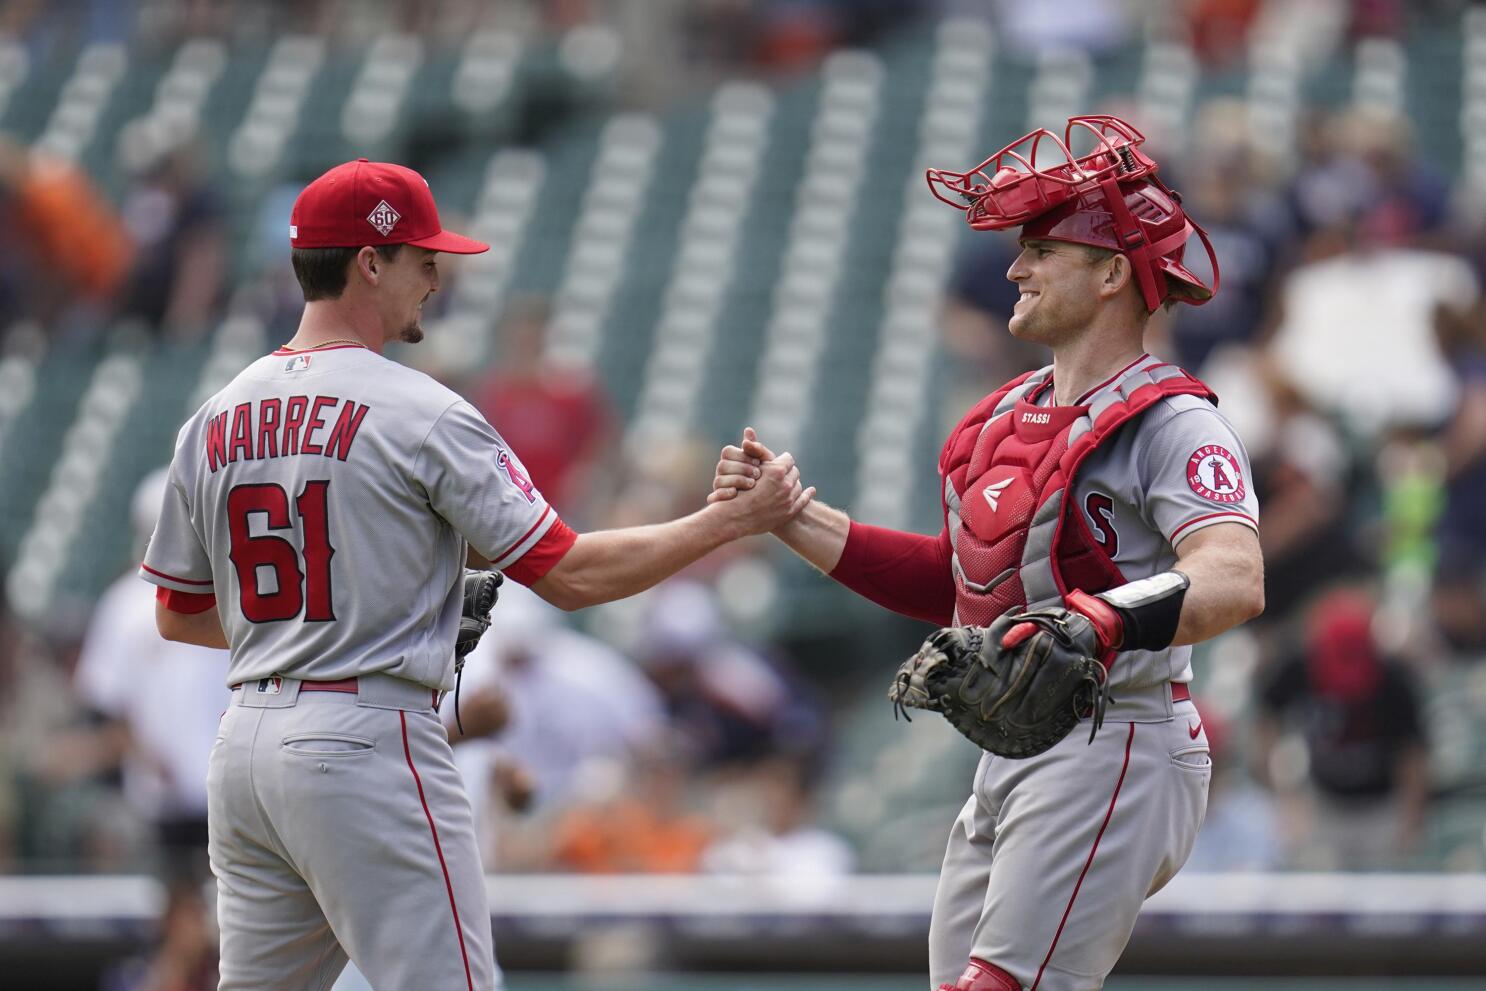 Phillies lose late lead, rally to finish 3-game sweep of Tigers